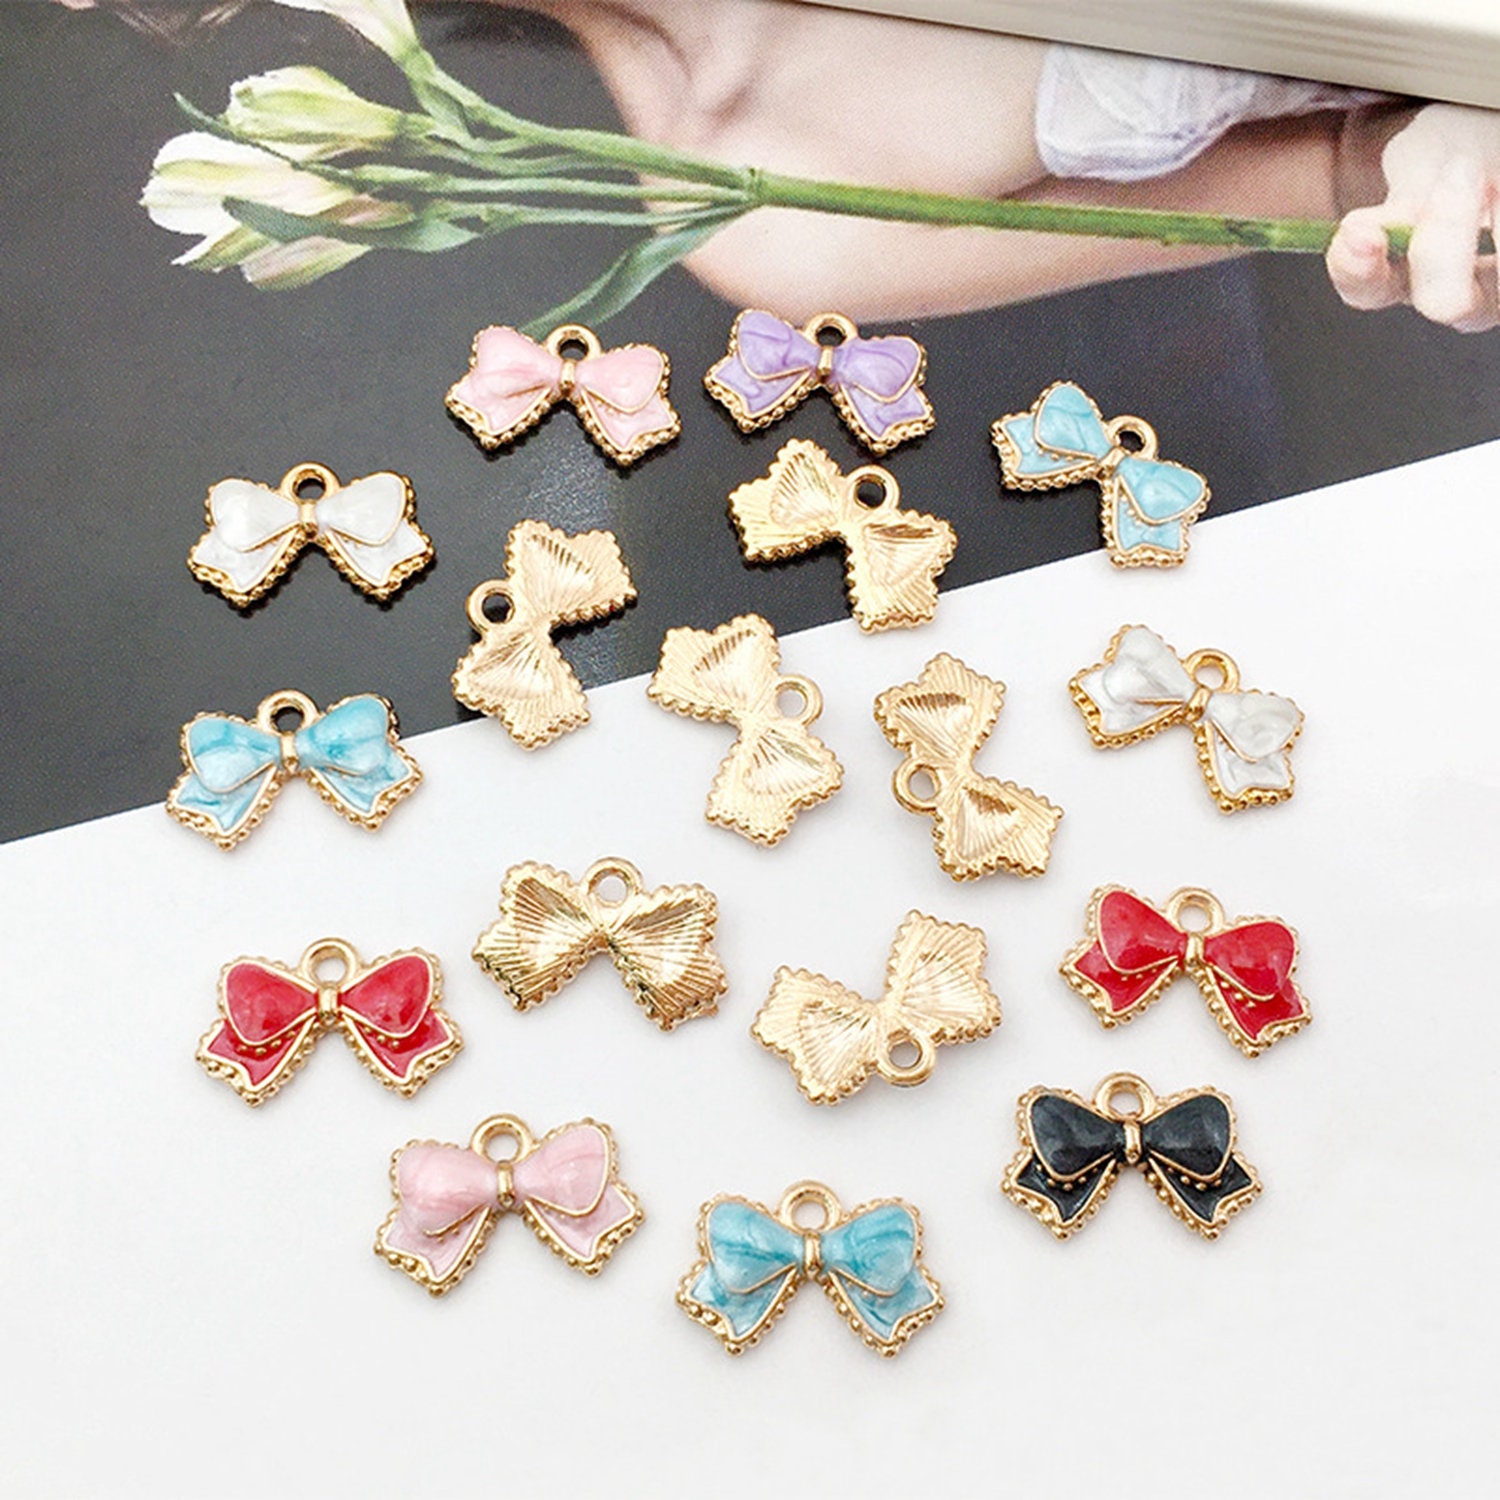 10-50pcs Mixed Fashion Bow Charms For Jewelry Making Vintage Antique  Silver/Bronze Color Bowknot Pendants DIY Handmade Findings